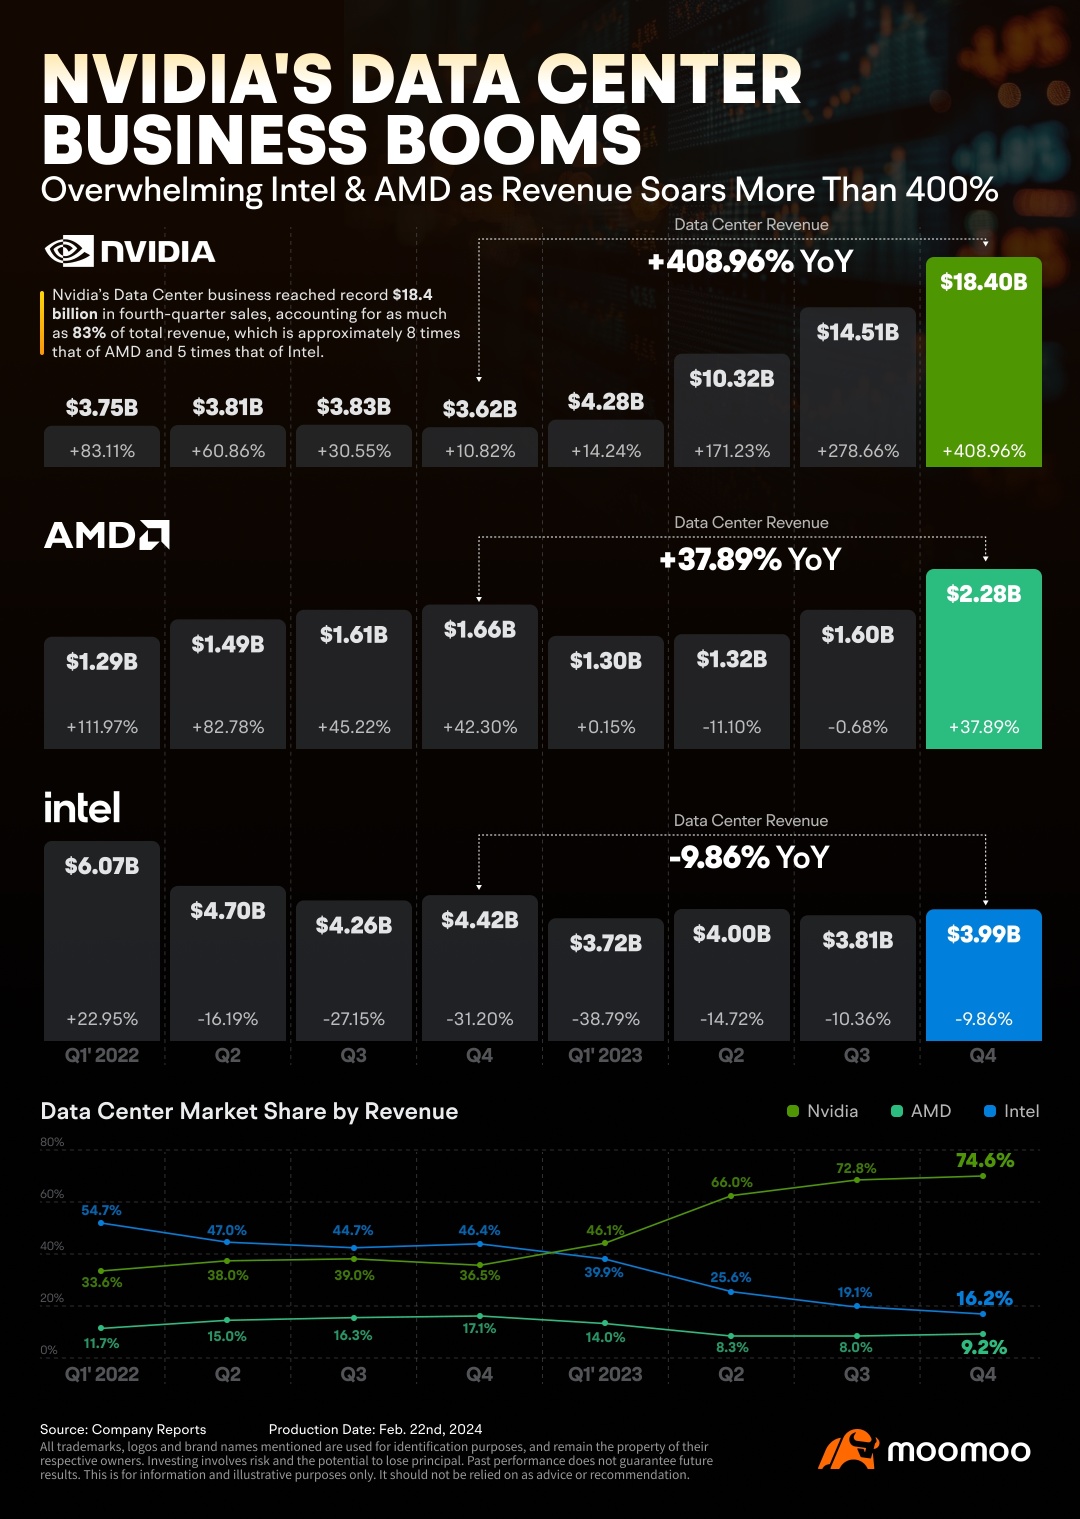 Key Insights You Need to Know About Nvidia's Latest Earnings Report